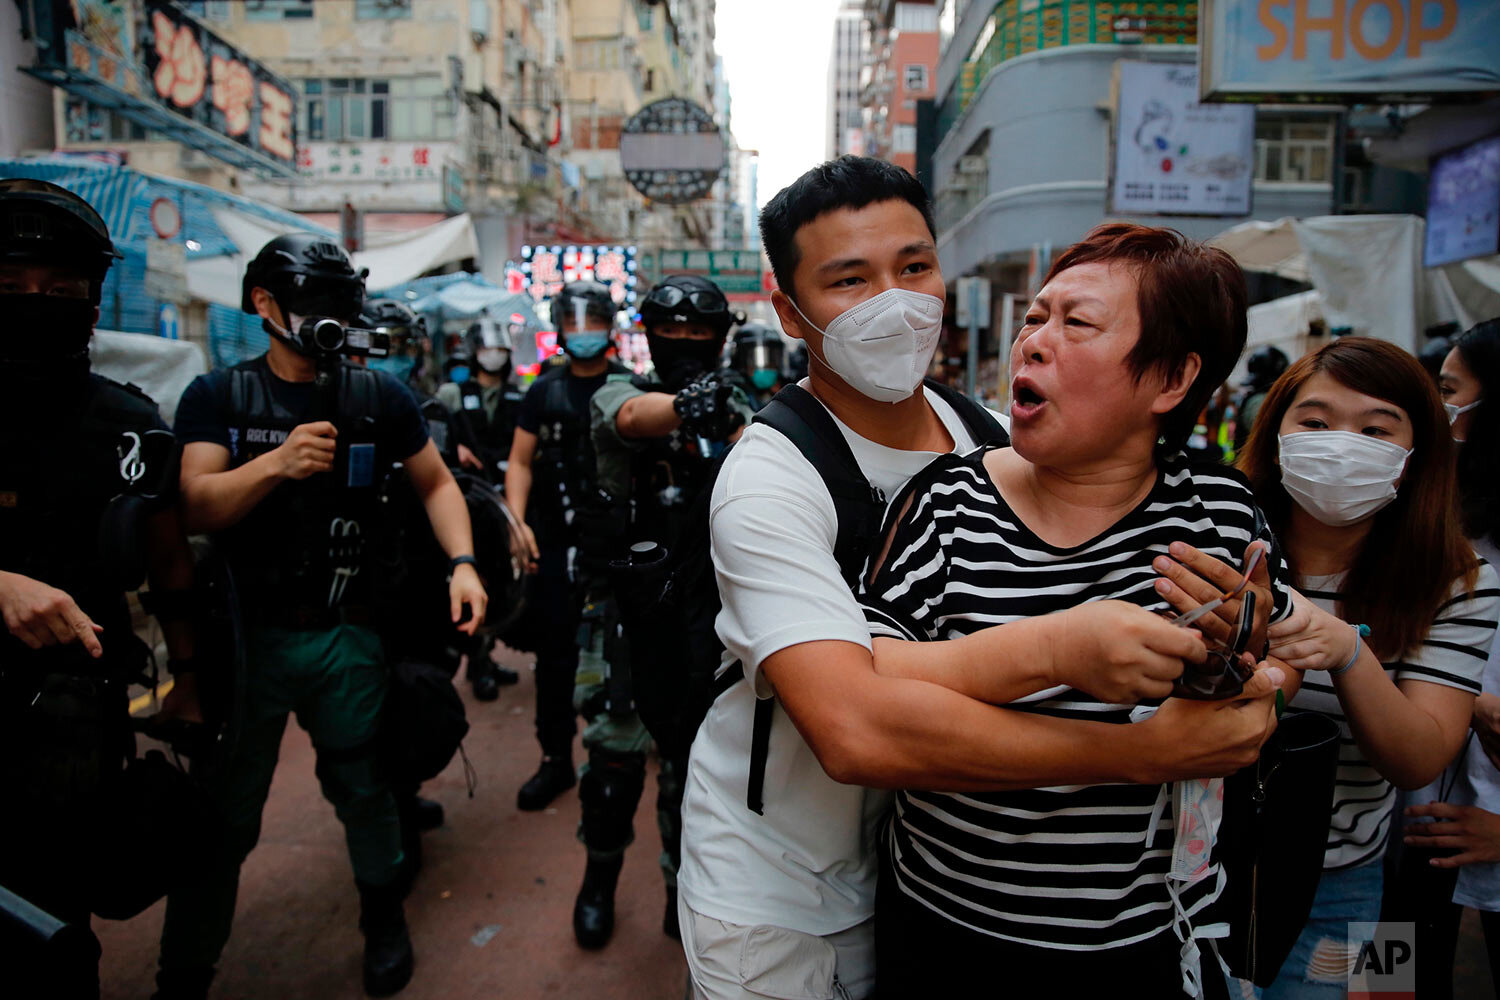  A woman argues with police as she was told to stay away from the area in Mongkok, Hong Kong, Wednesday, May 27, 2020. (AP Photo/Kin Cheung) 